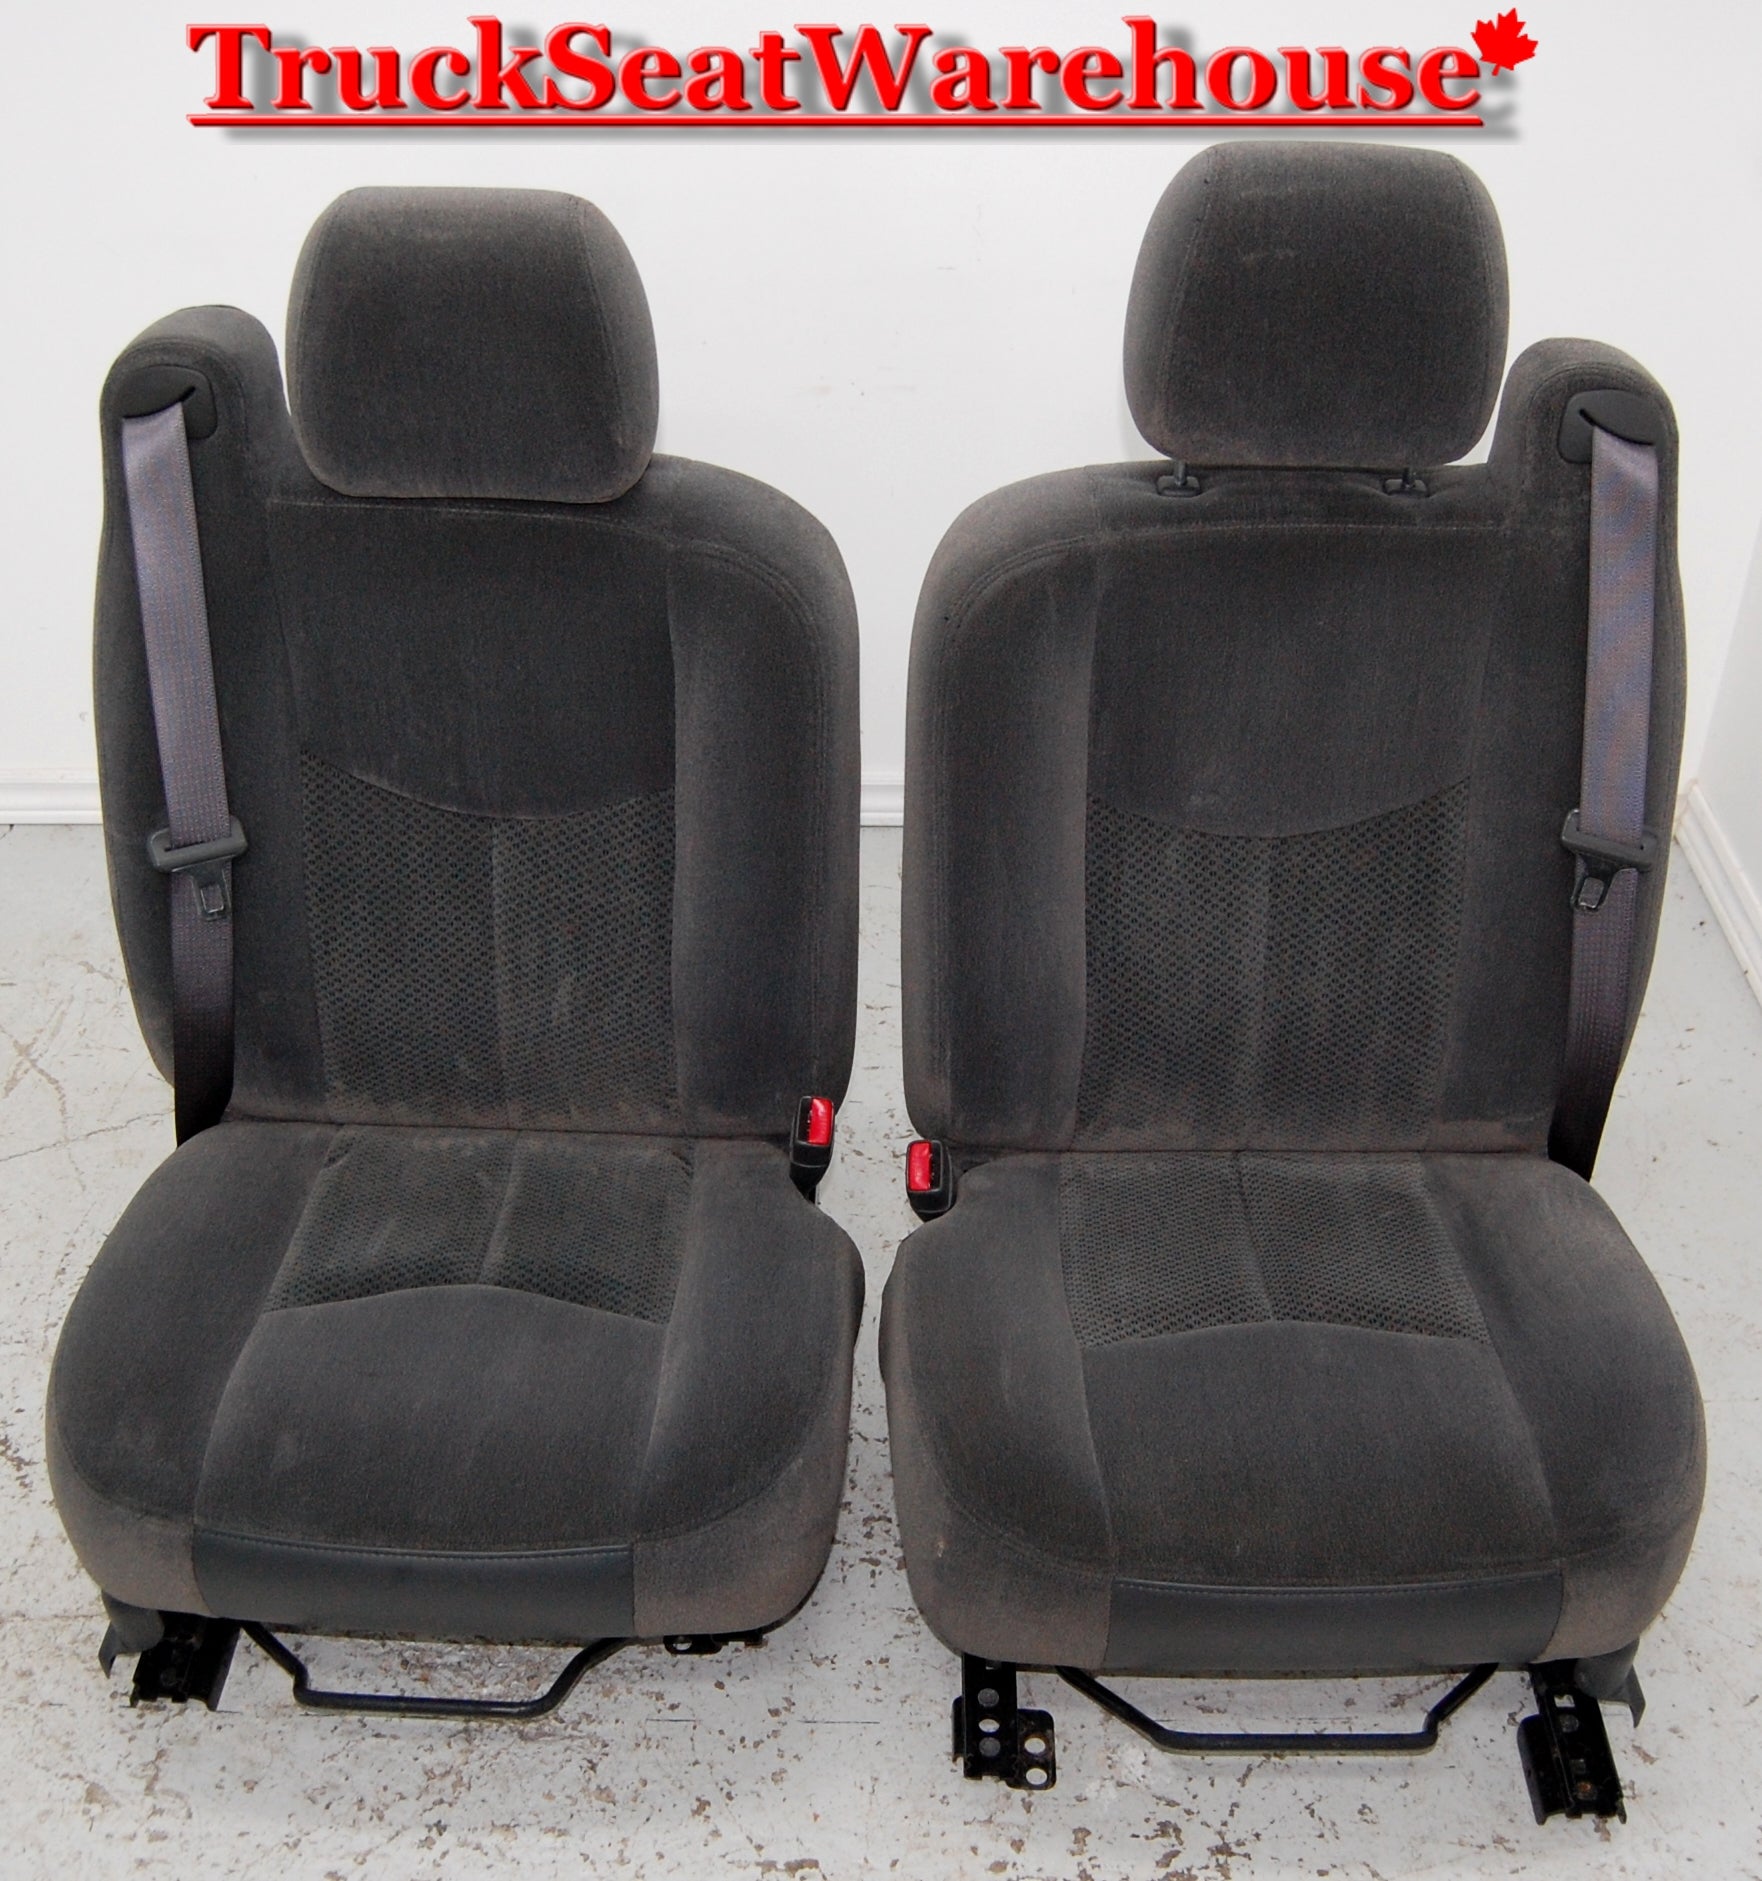 Grey pewter color cloth front seats from a 2005 Chev Avalanche Will fit 2003-07 Classic Silverado Sierra Suburban Yukon Tahoe or Avalanche Chev Truck